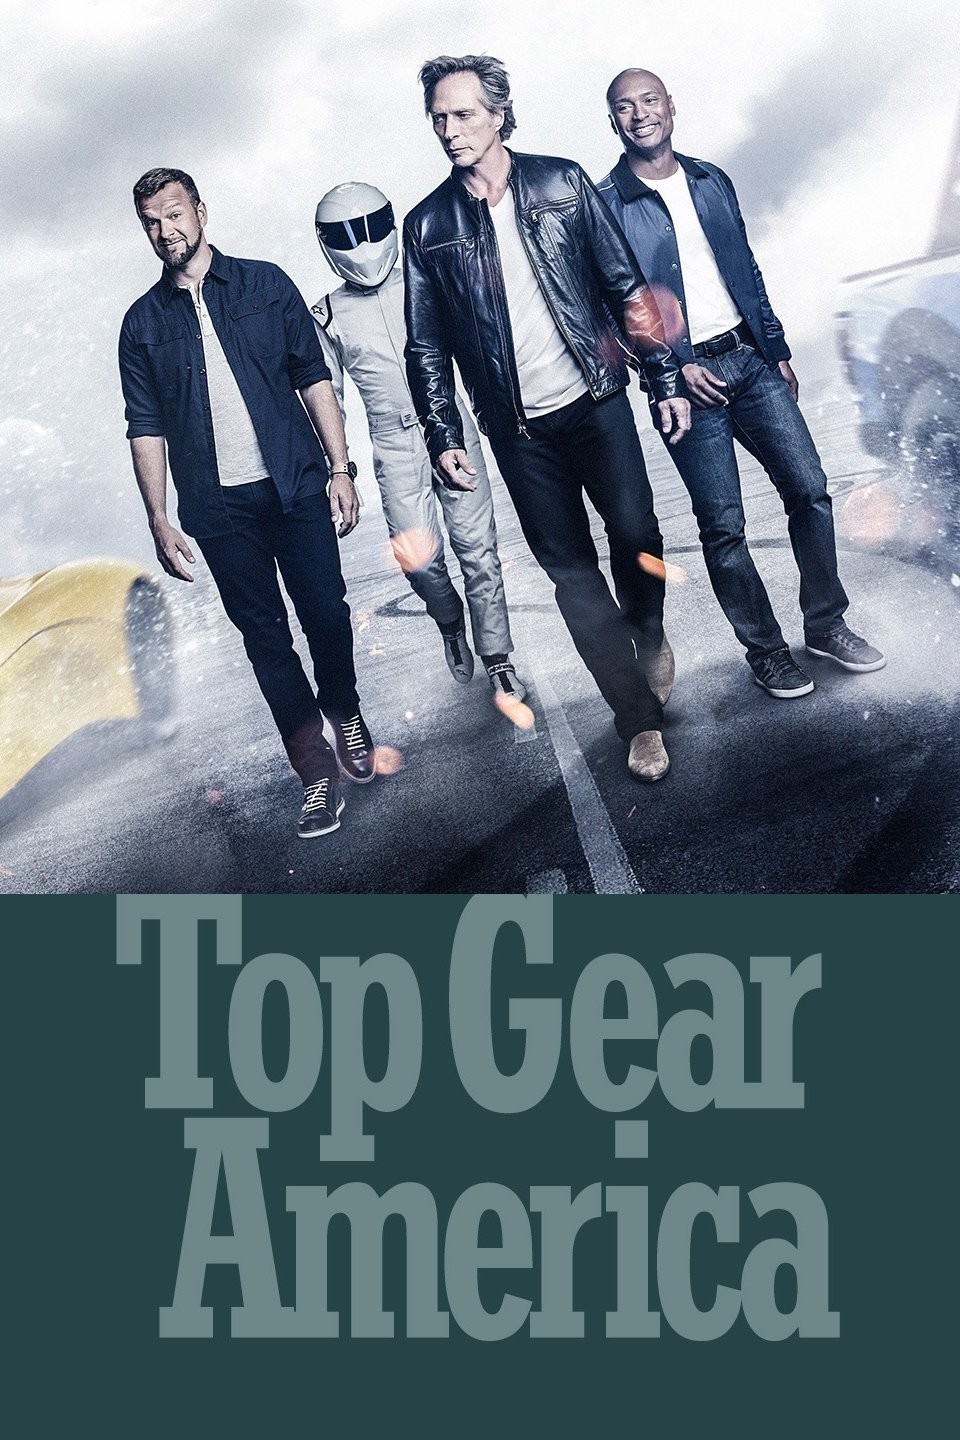 Get Ready For the All-New Top Gear America!